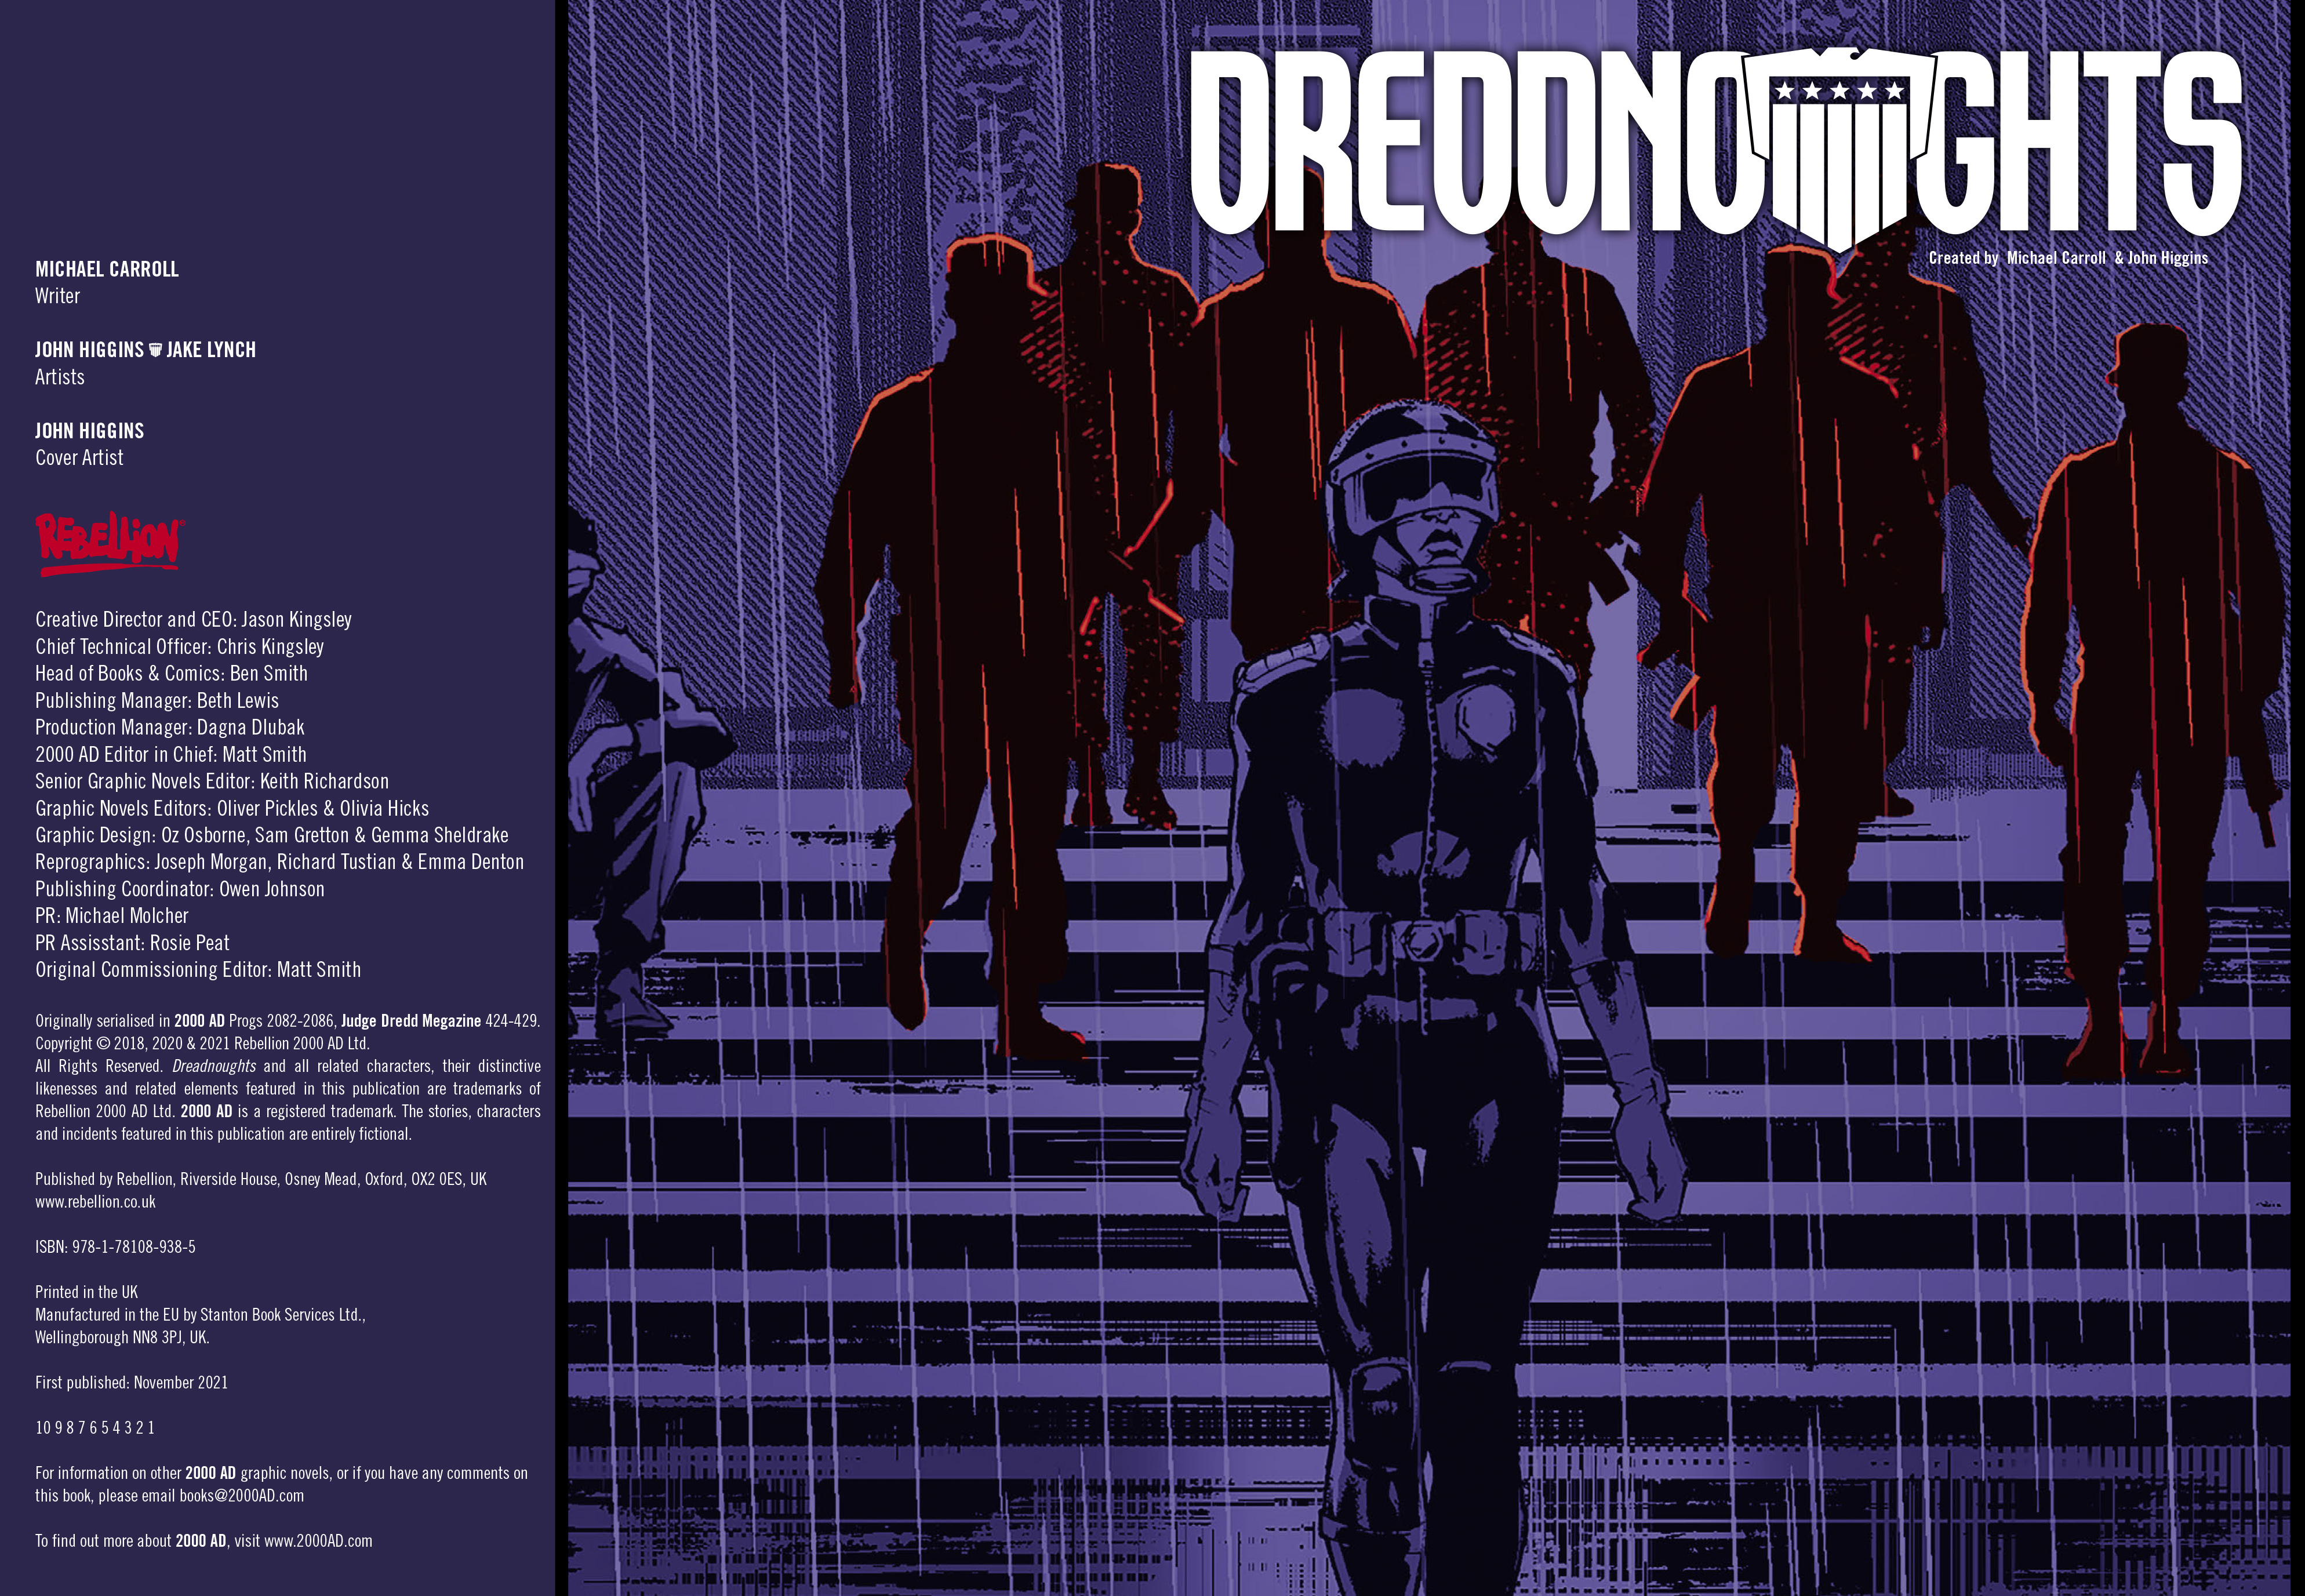 Read online Dreadnoughts comic -  Issue # TPB - 2